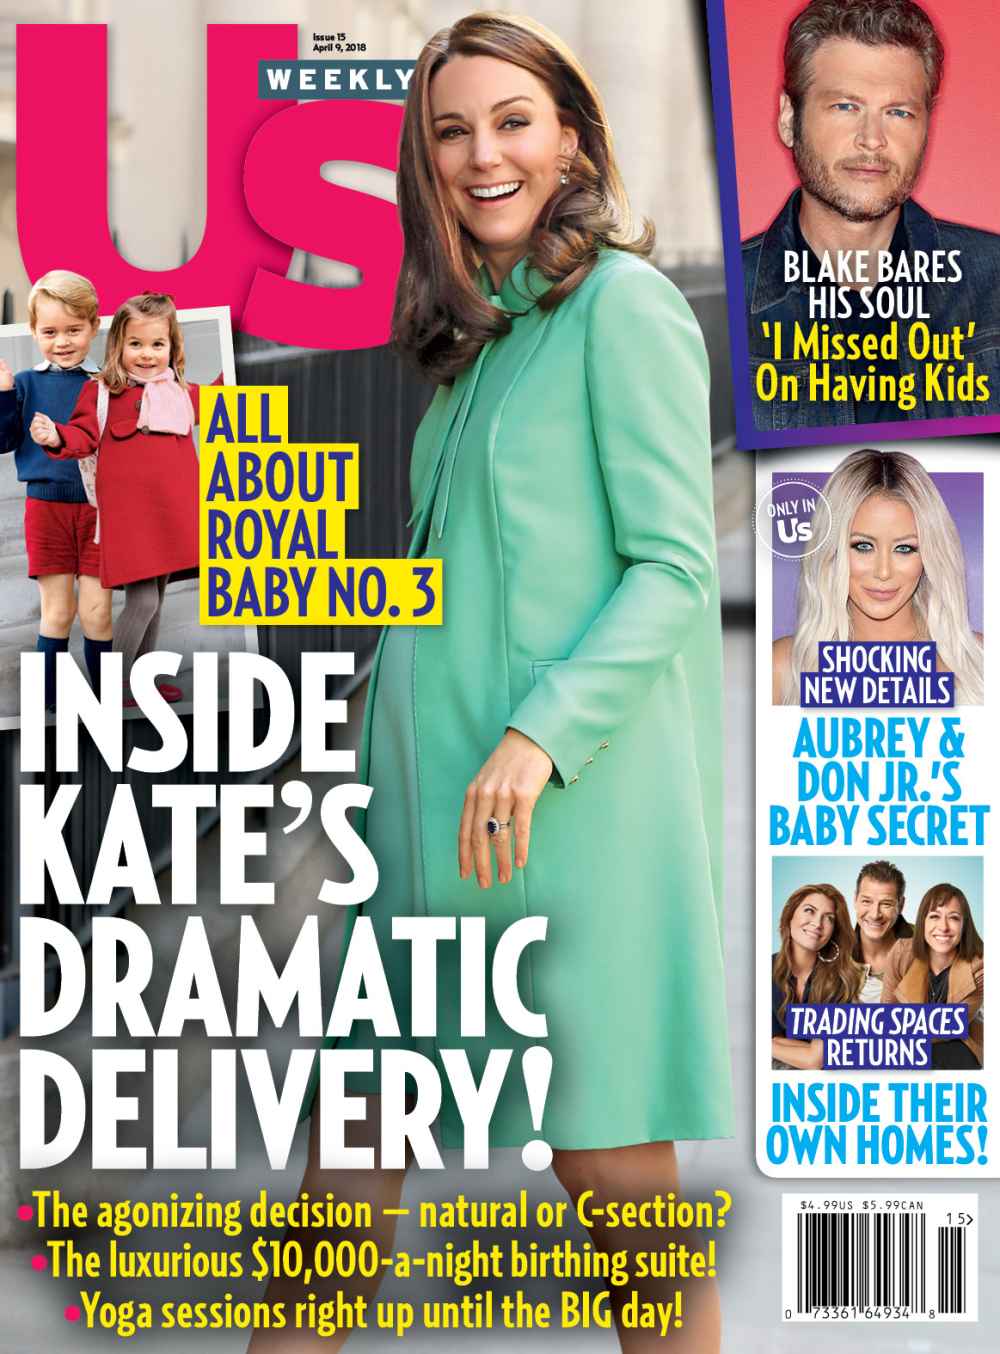 us-weekly-1518-cover